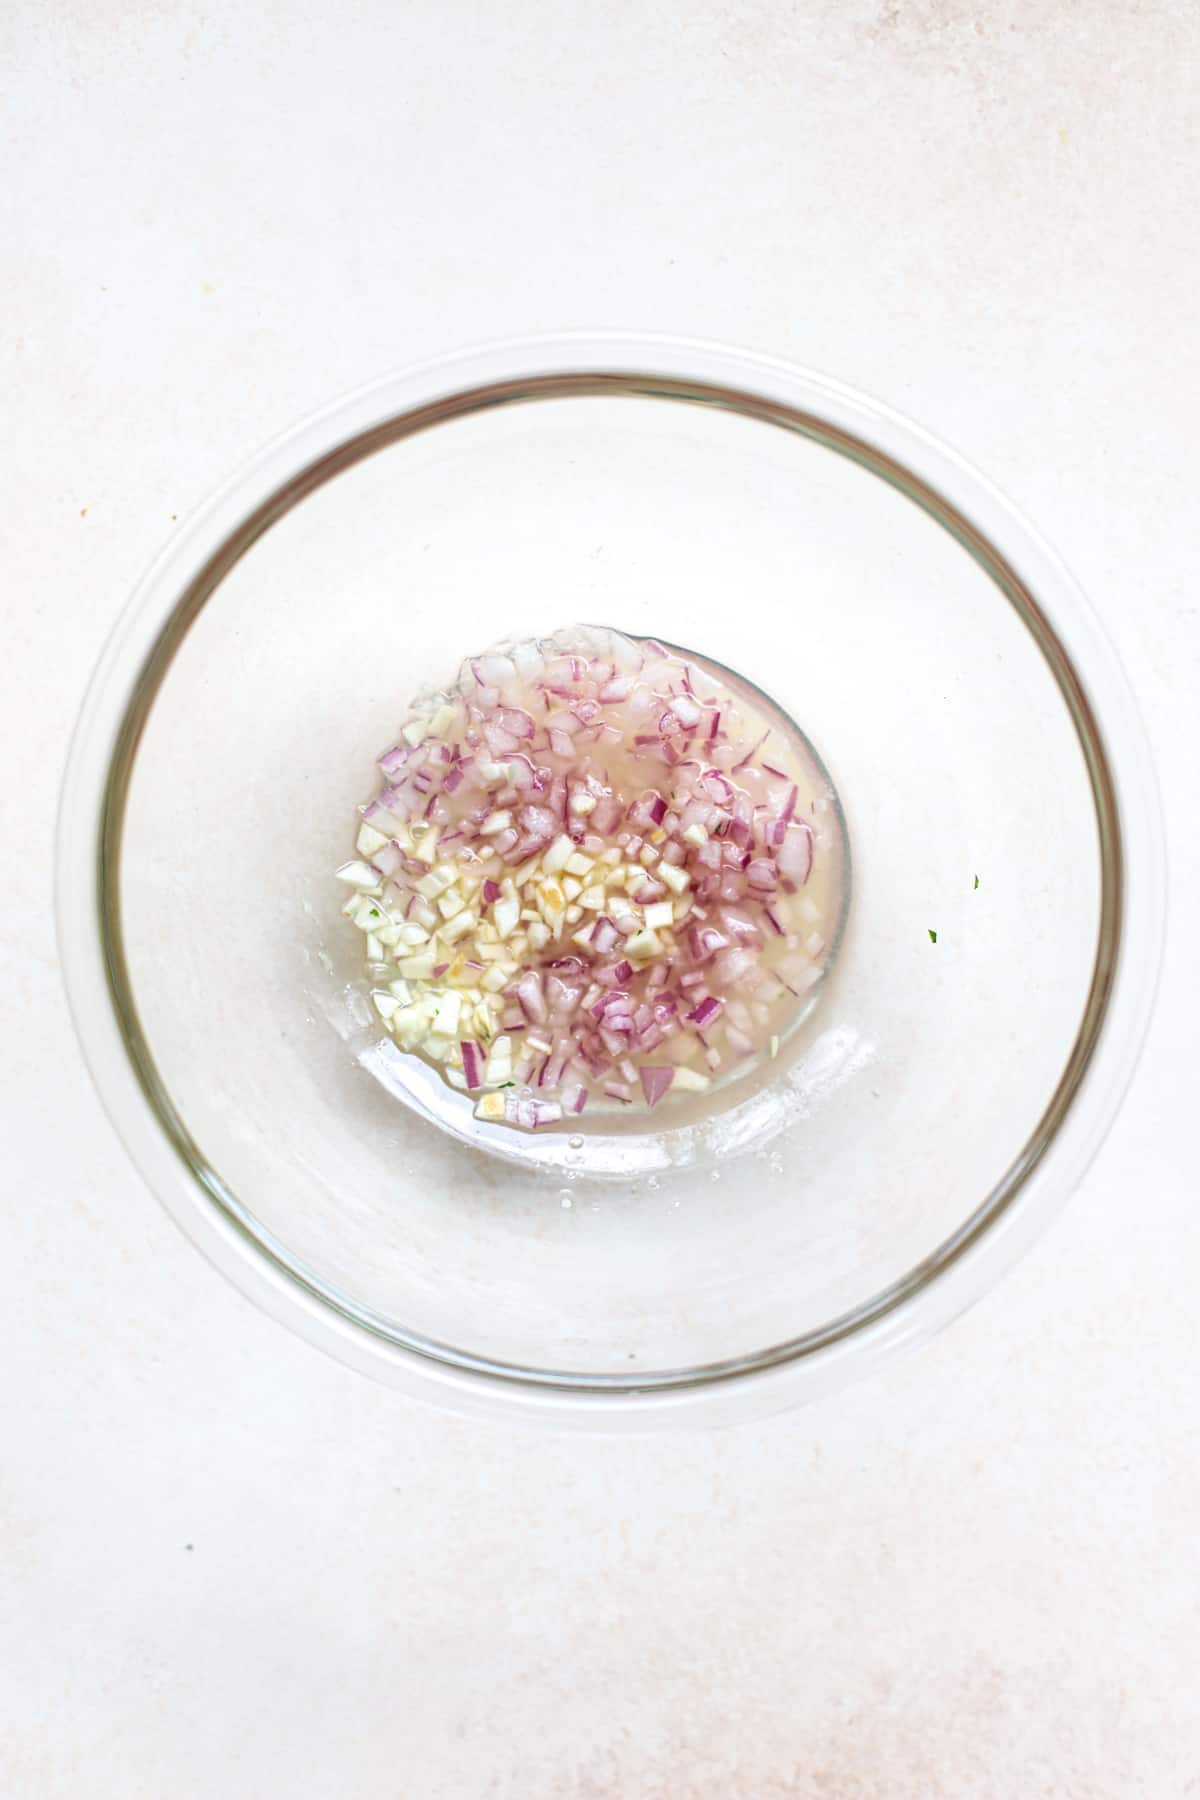 Onions and garlic macerating in lemon juice in clear glass bowl, on beige and white surface